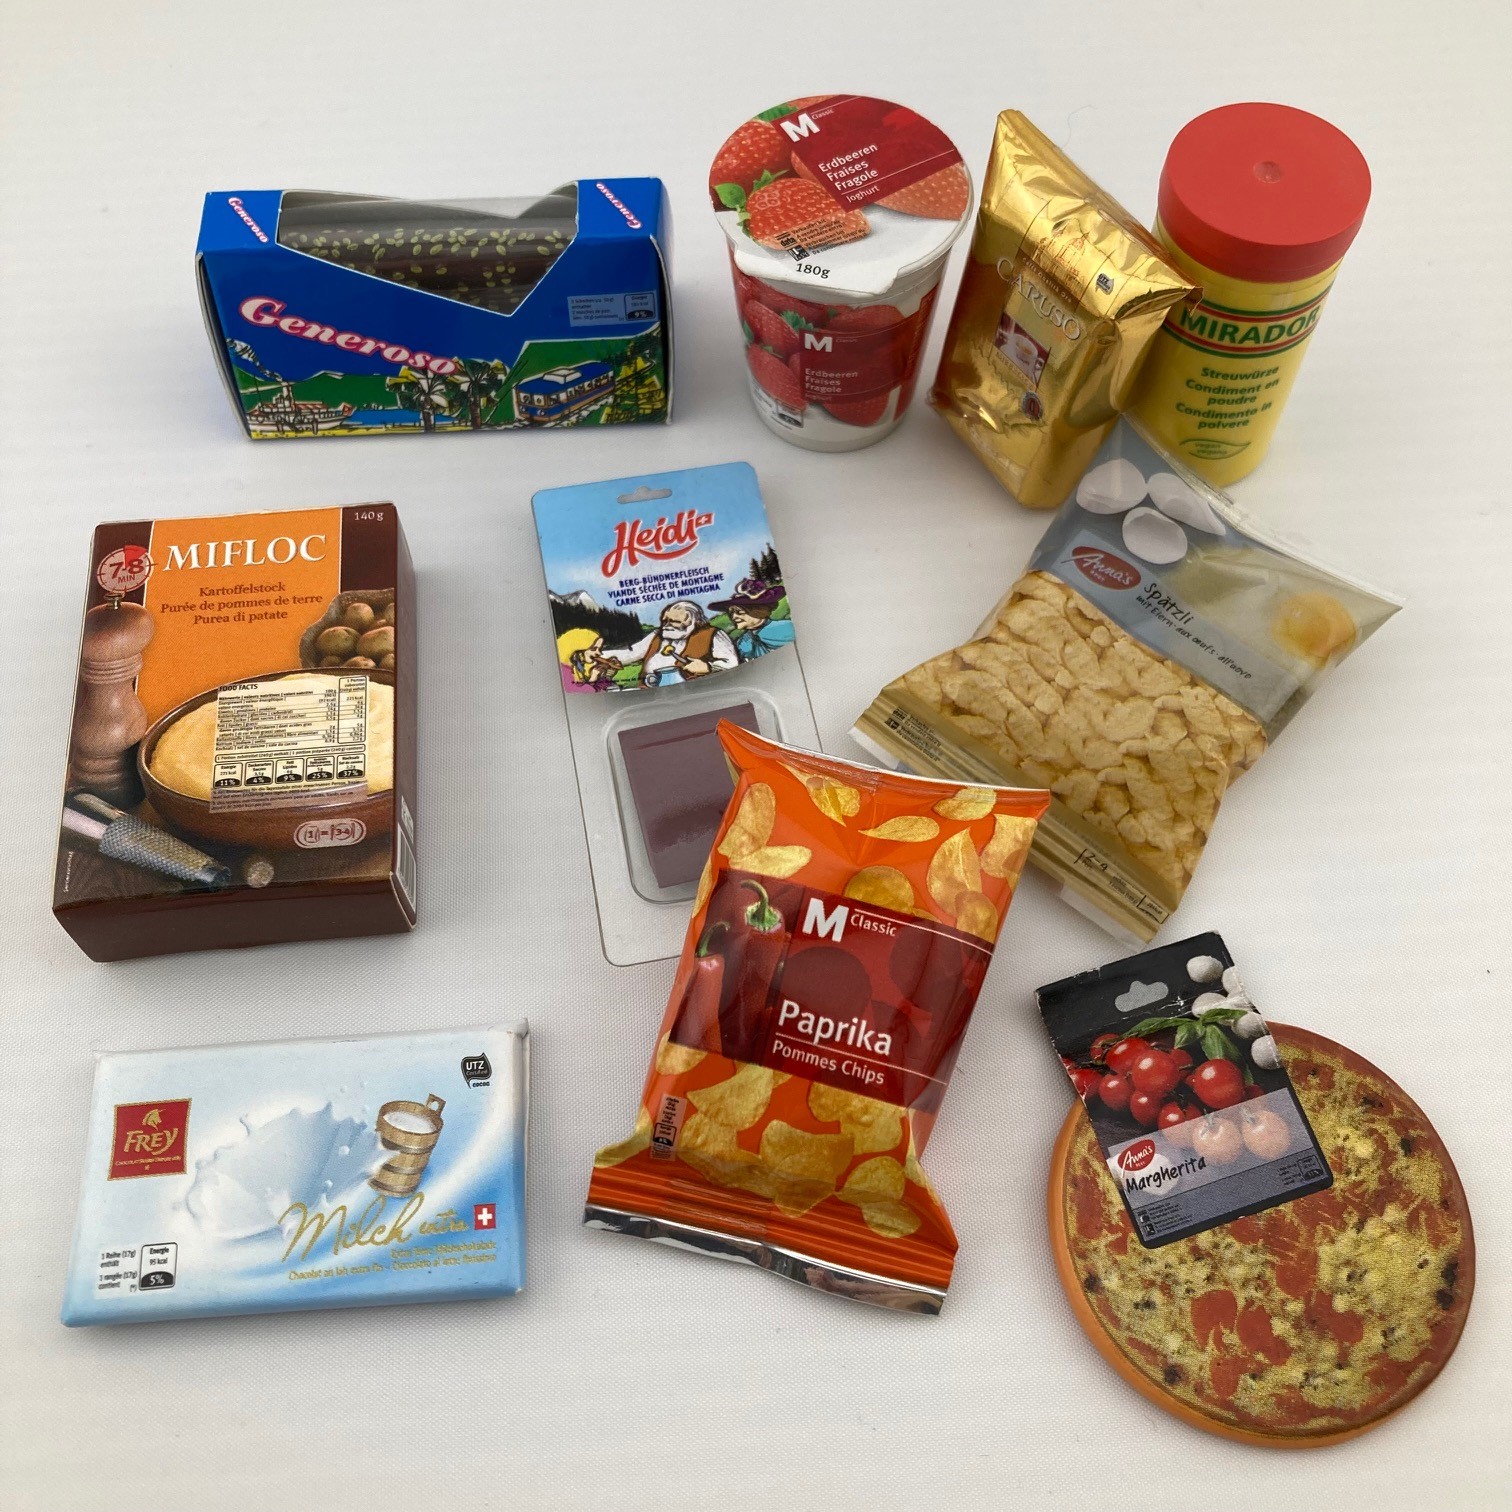 Lock & Lock 'bento boxes' now available at Migros in Switzerland